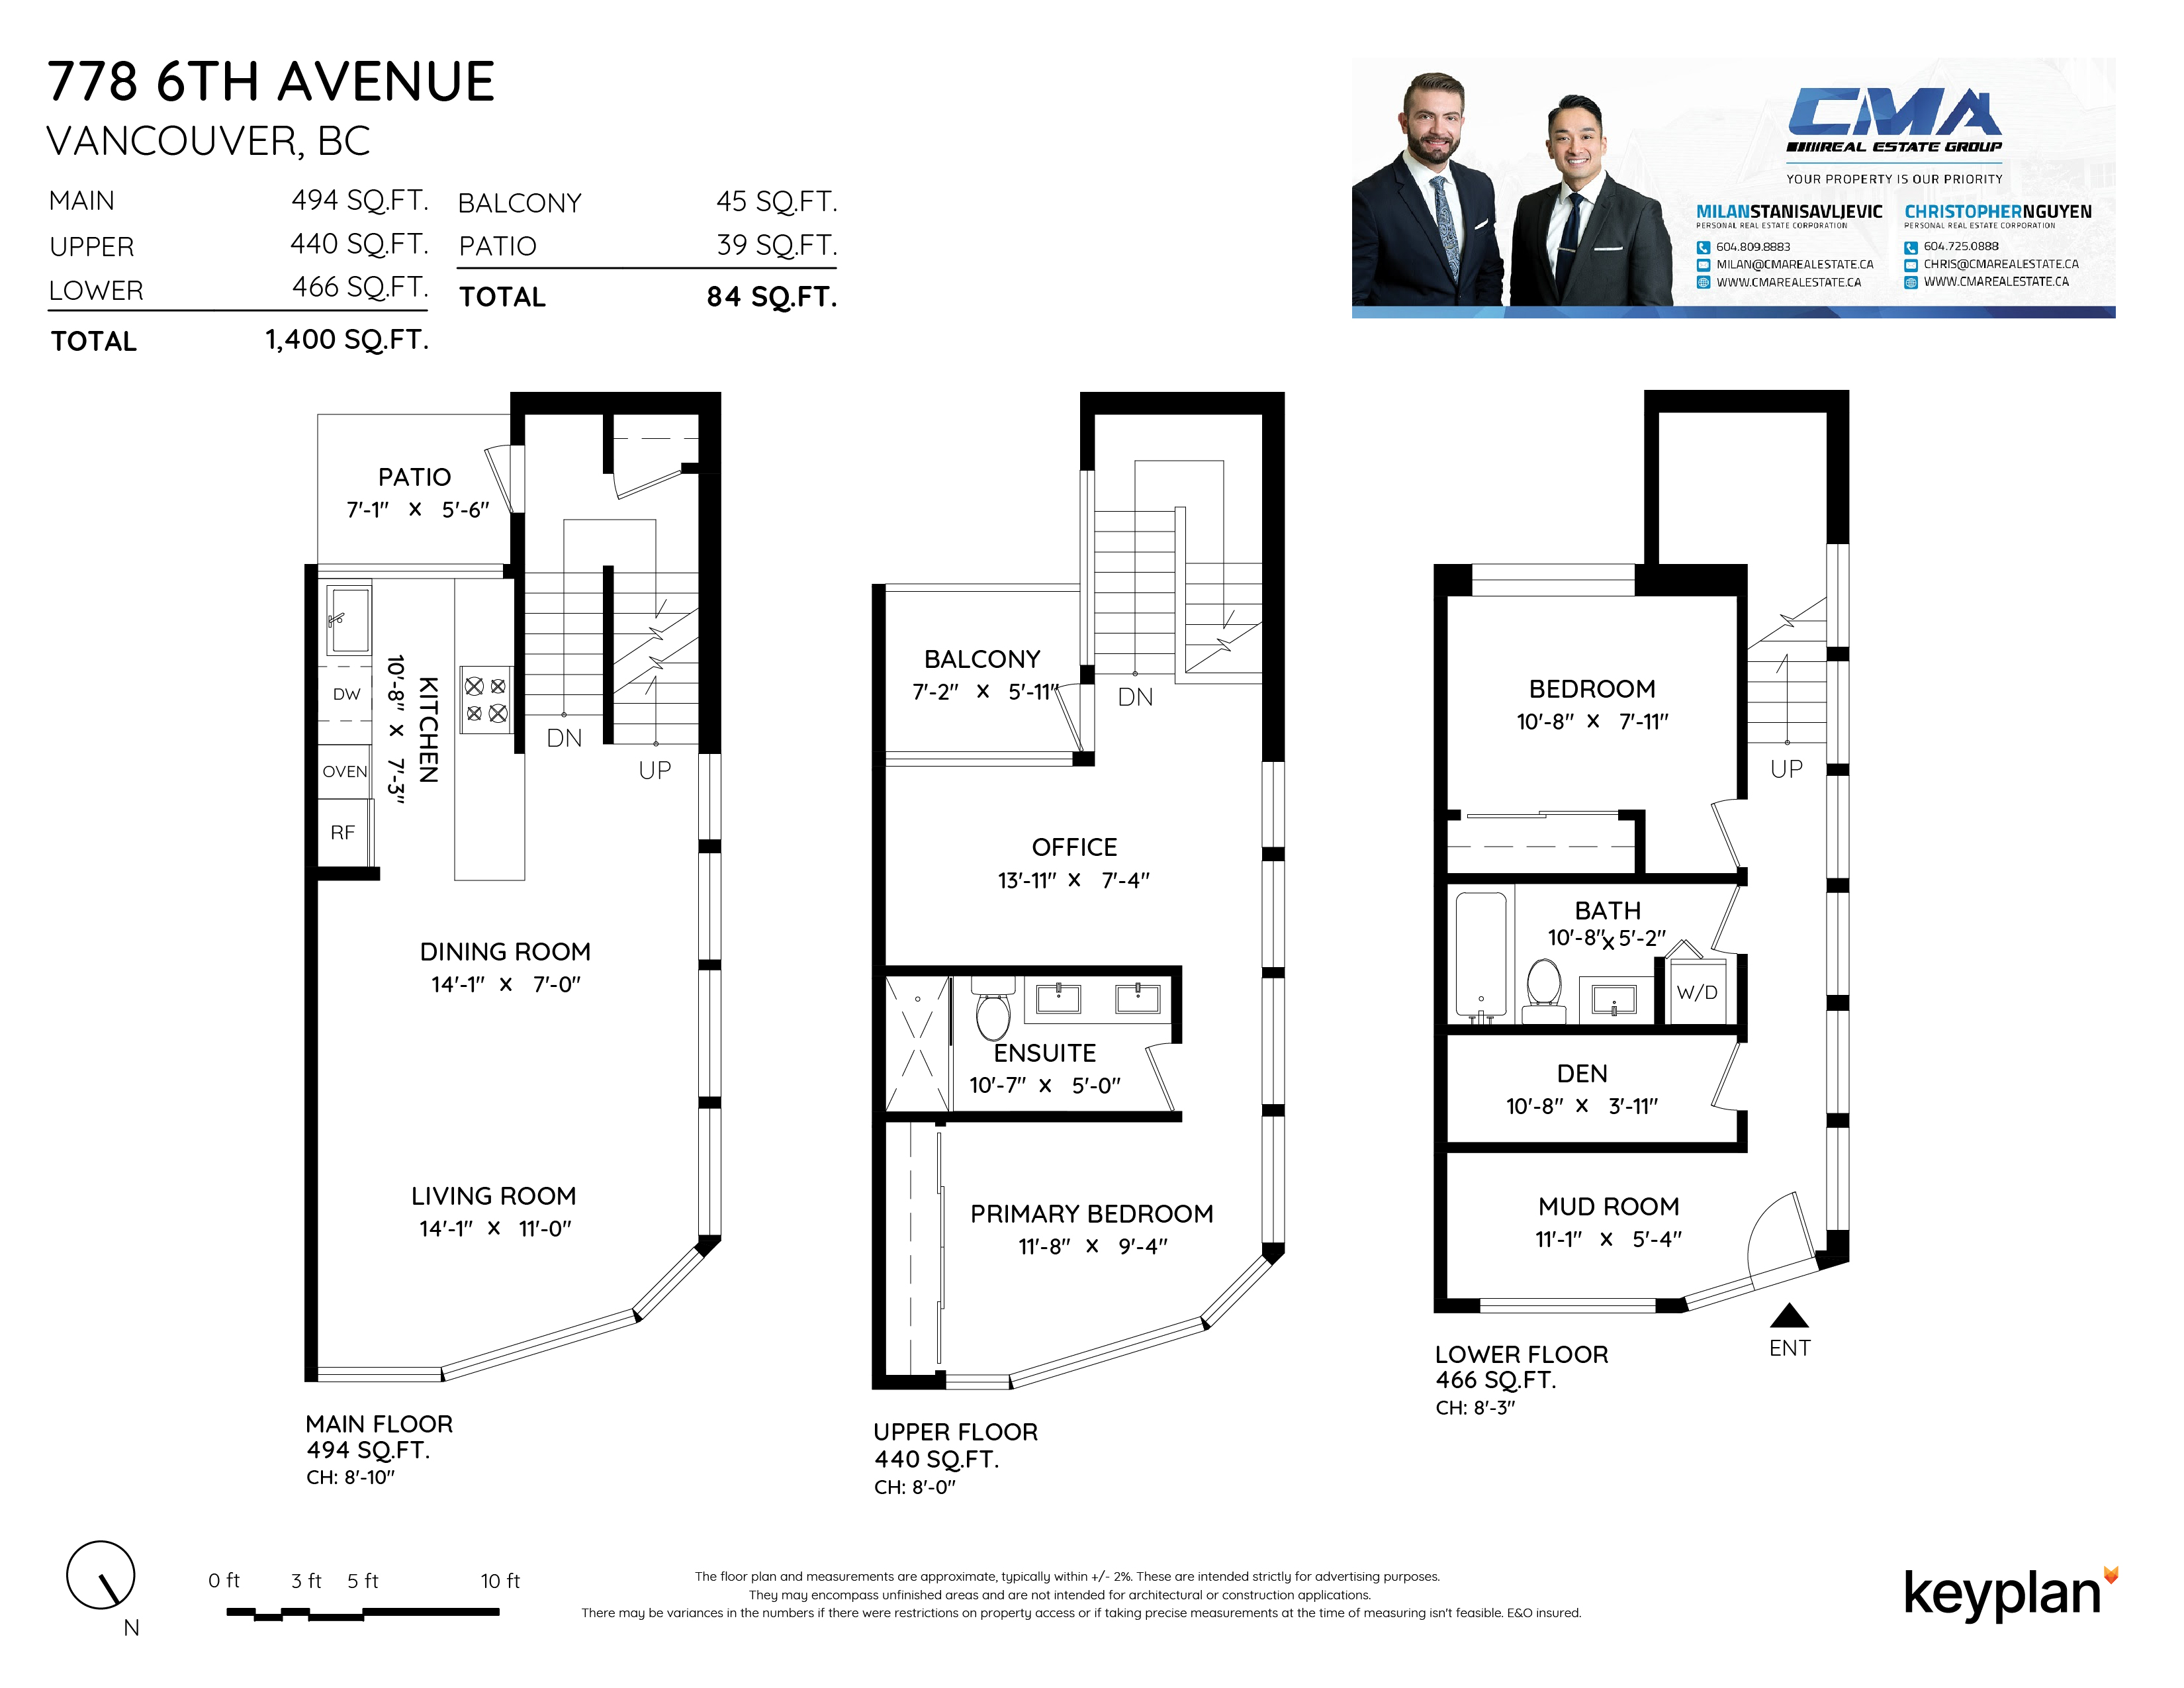 CMA Real Estate Group - 778 6th Avenue West, Vancouver, BC, Canada | Floor Plan 1